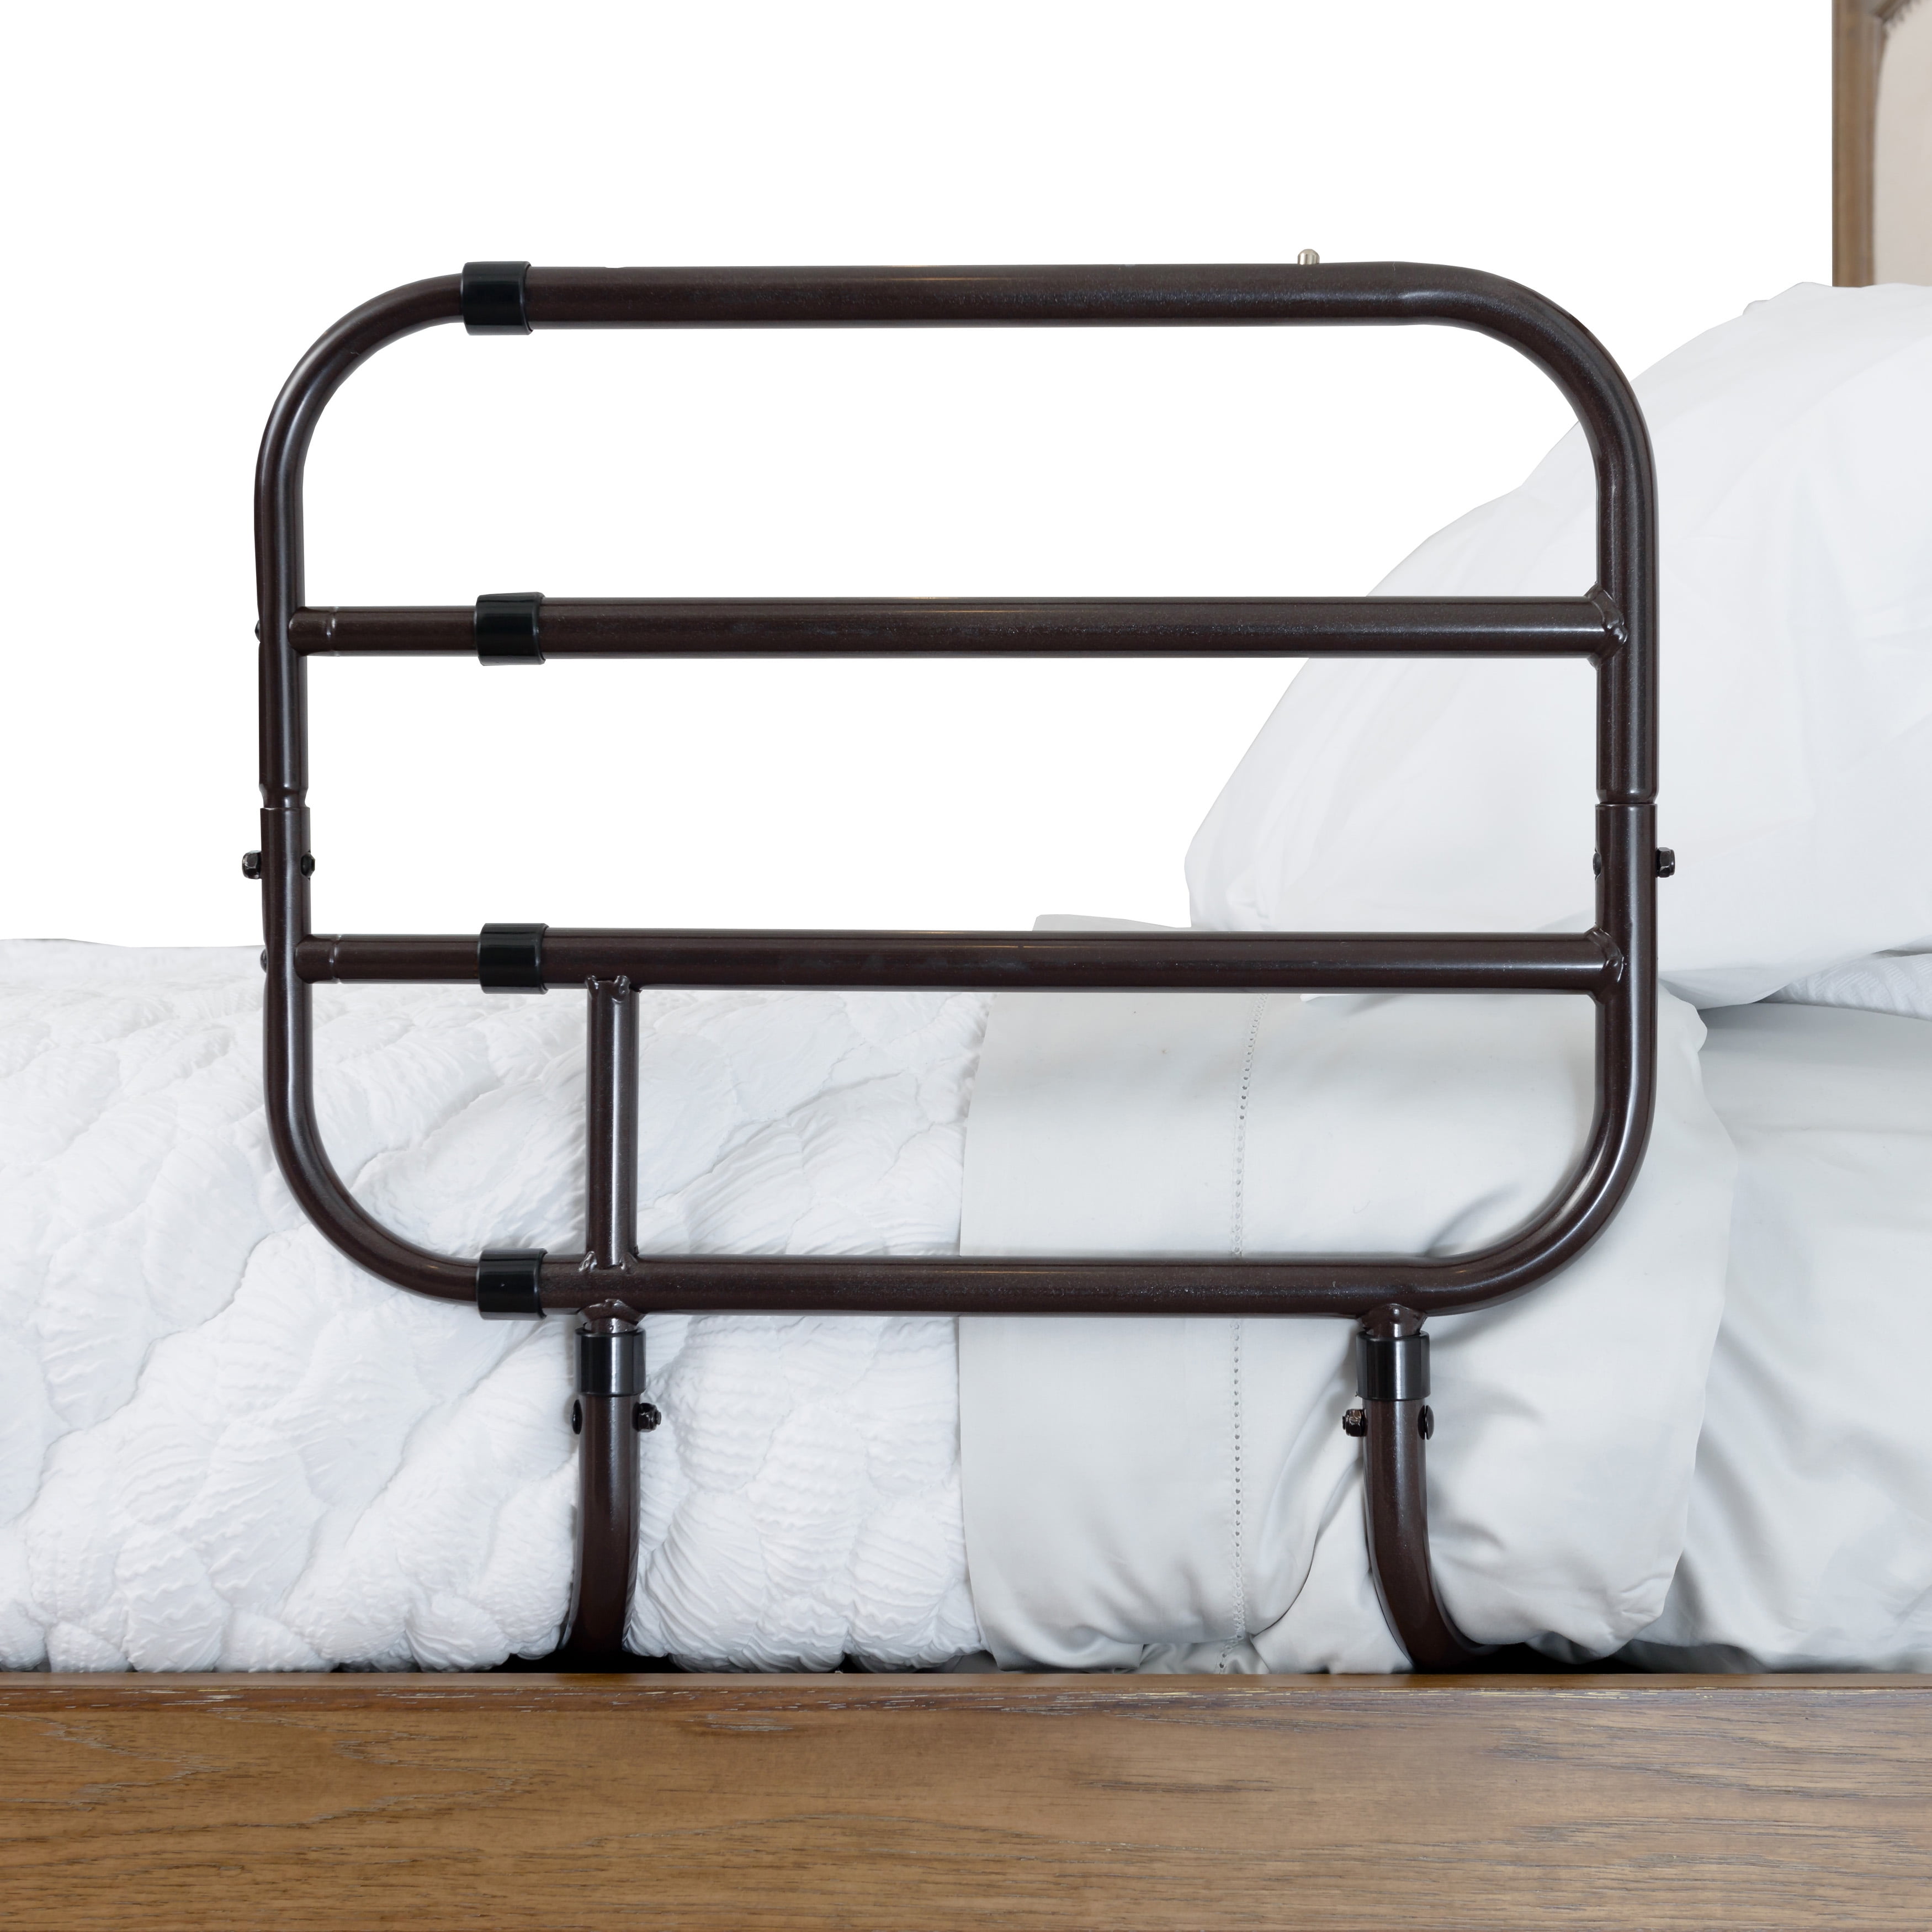 Bed Rail And Elderly Safety Handle, Bed Frame Extension Rails